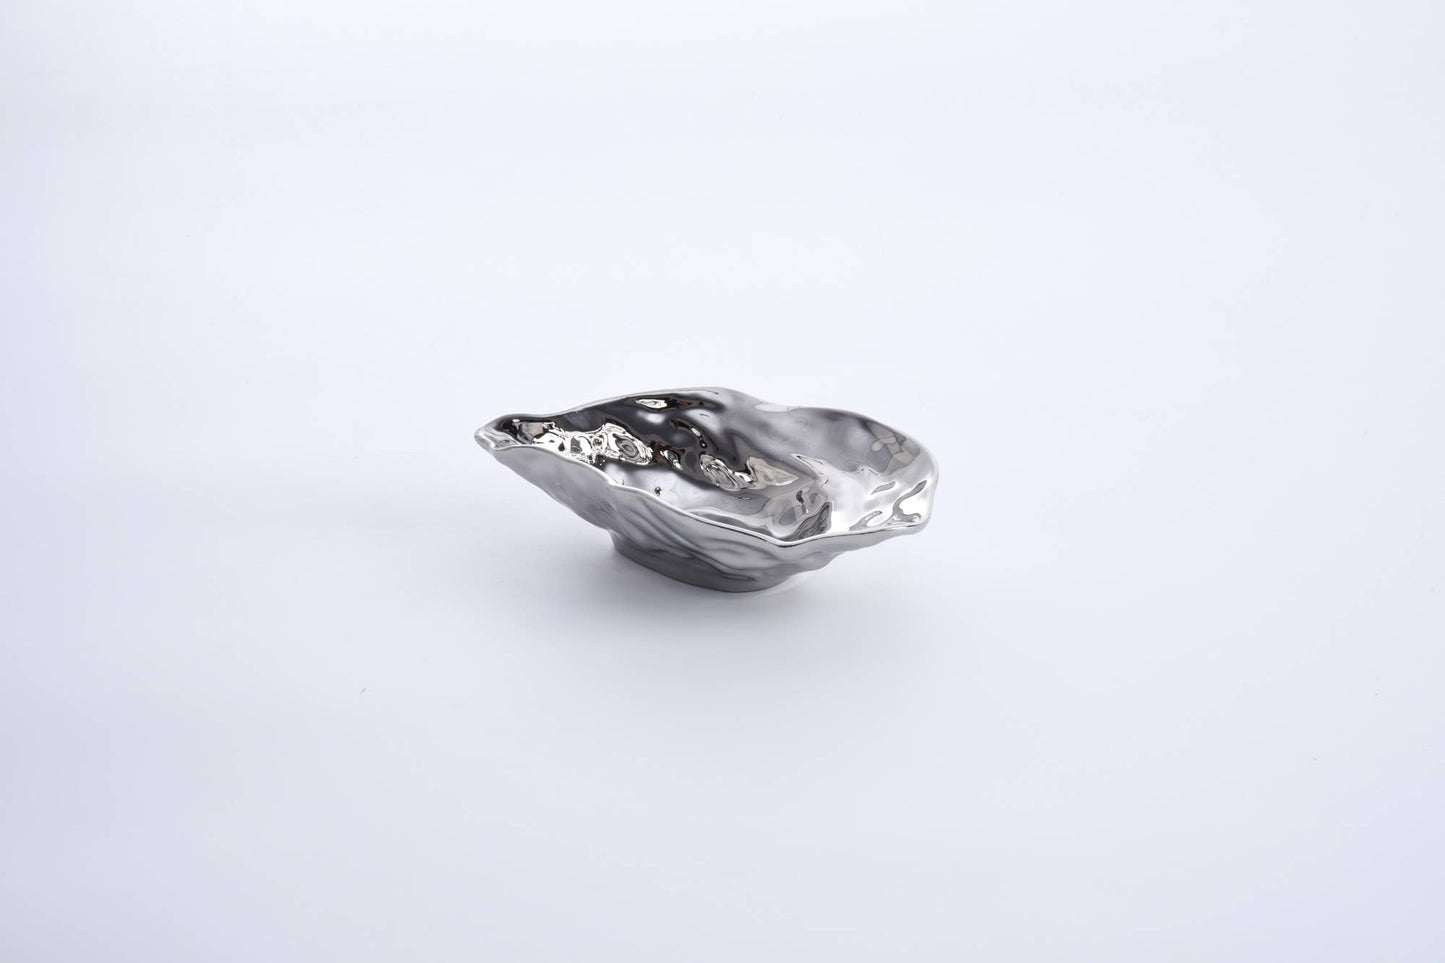 Small Oyster Bowl Silver